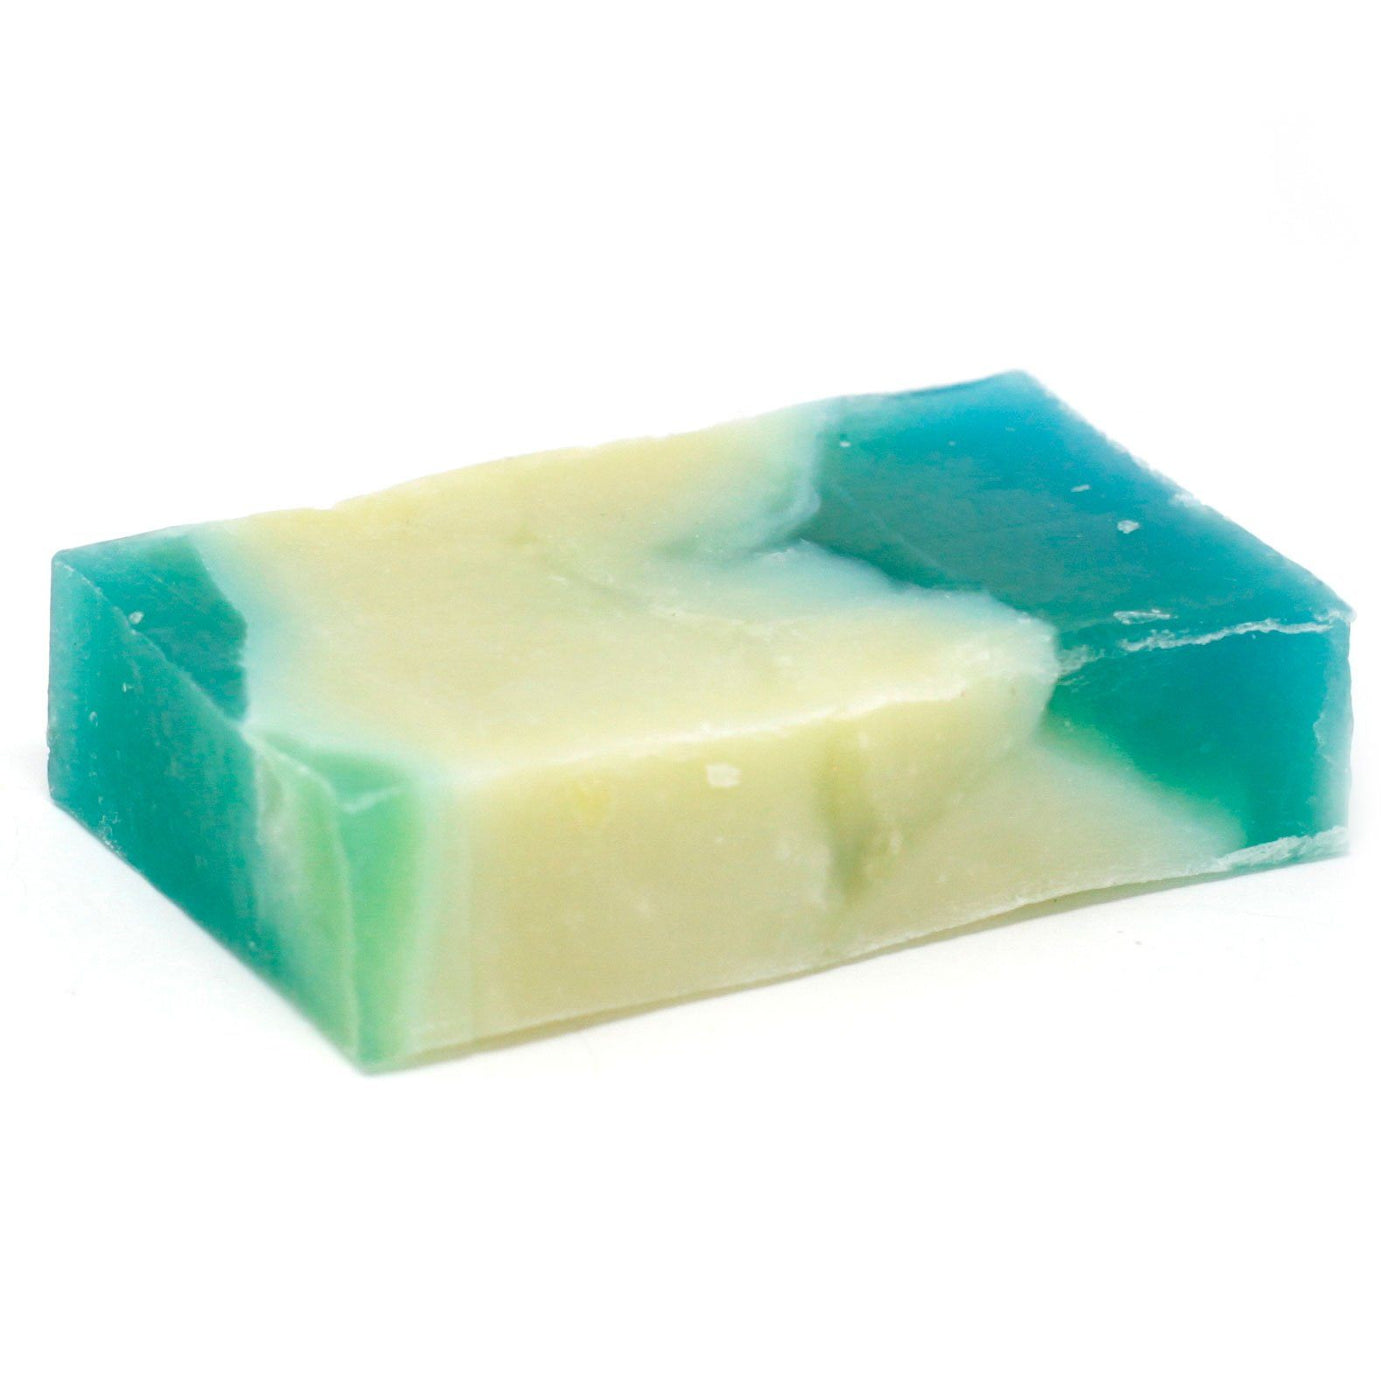 Rosemary Paraben Free Olive Oil Body Soap Loaf And Slices.